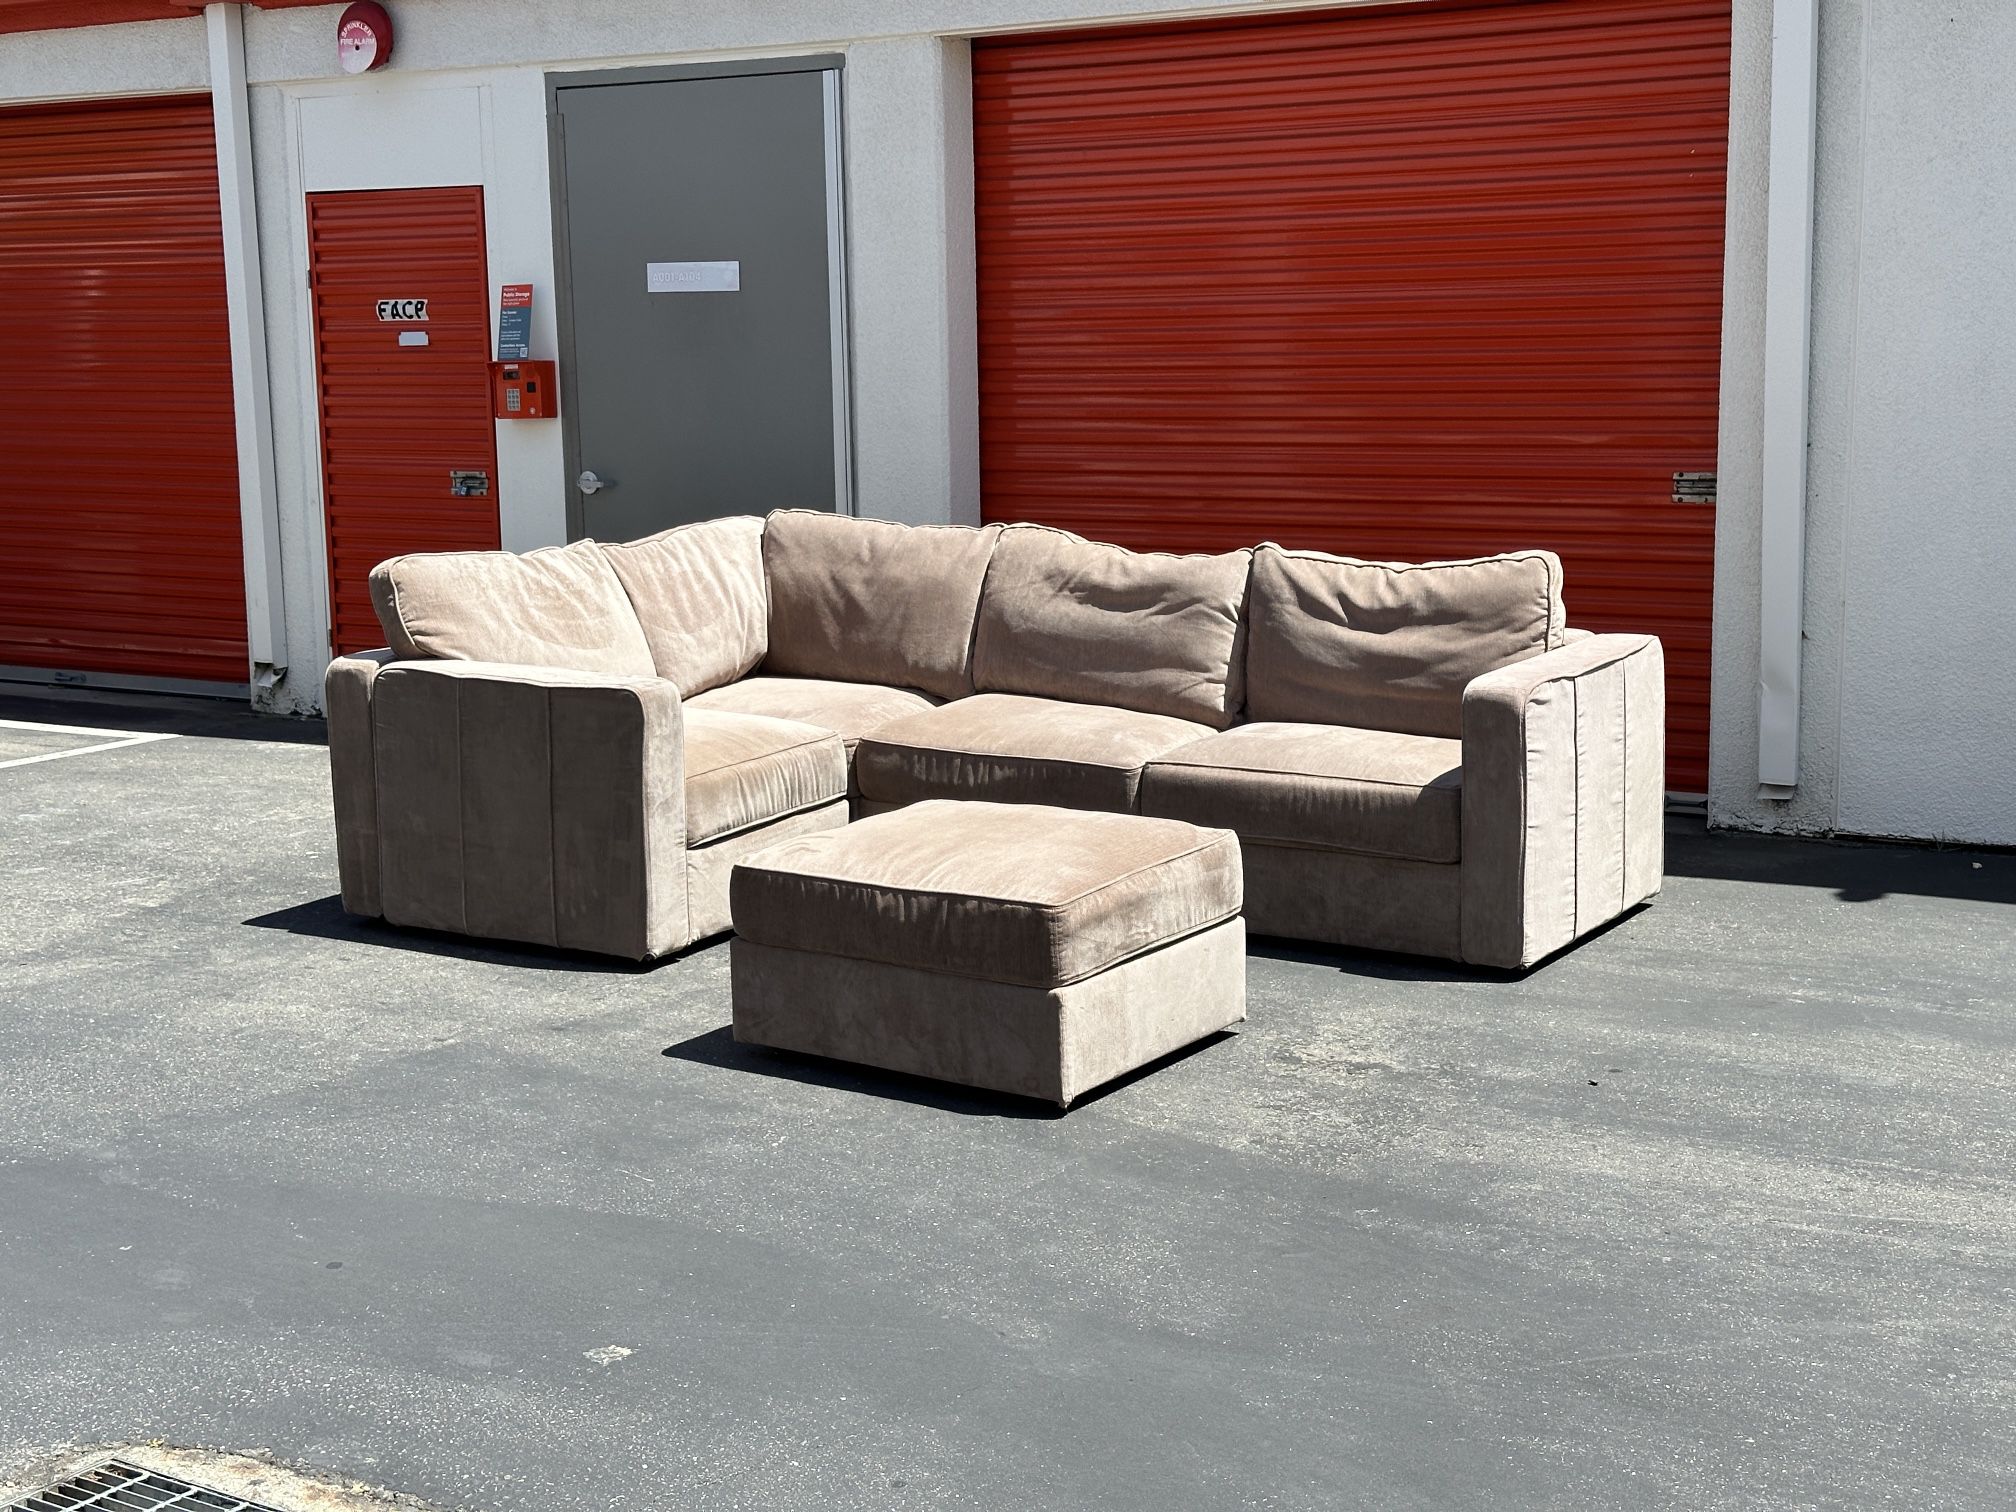 FREE DELIVERY- Modular 5-pc Sectional “Sactional”  Sofa Couch by LoveSac - Retail $8k